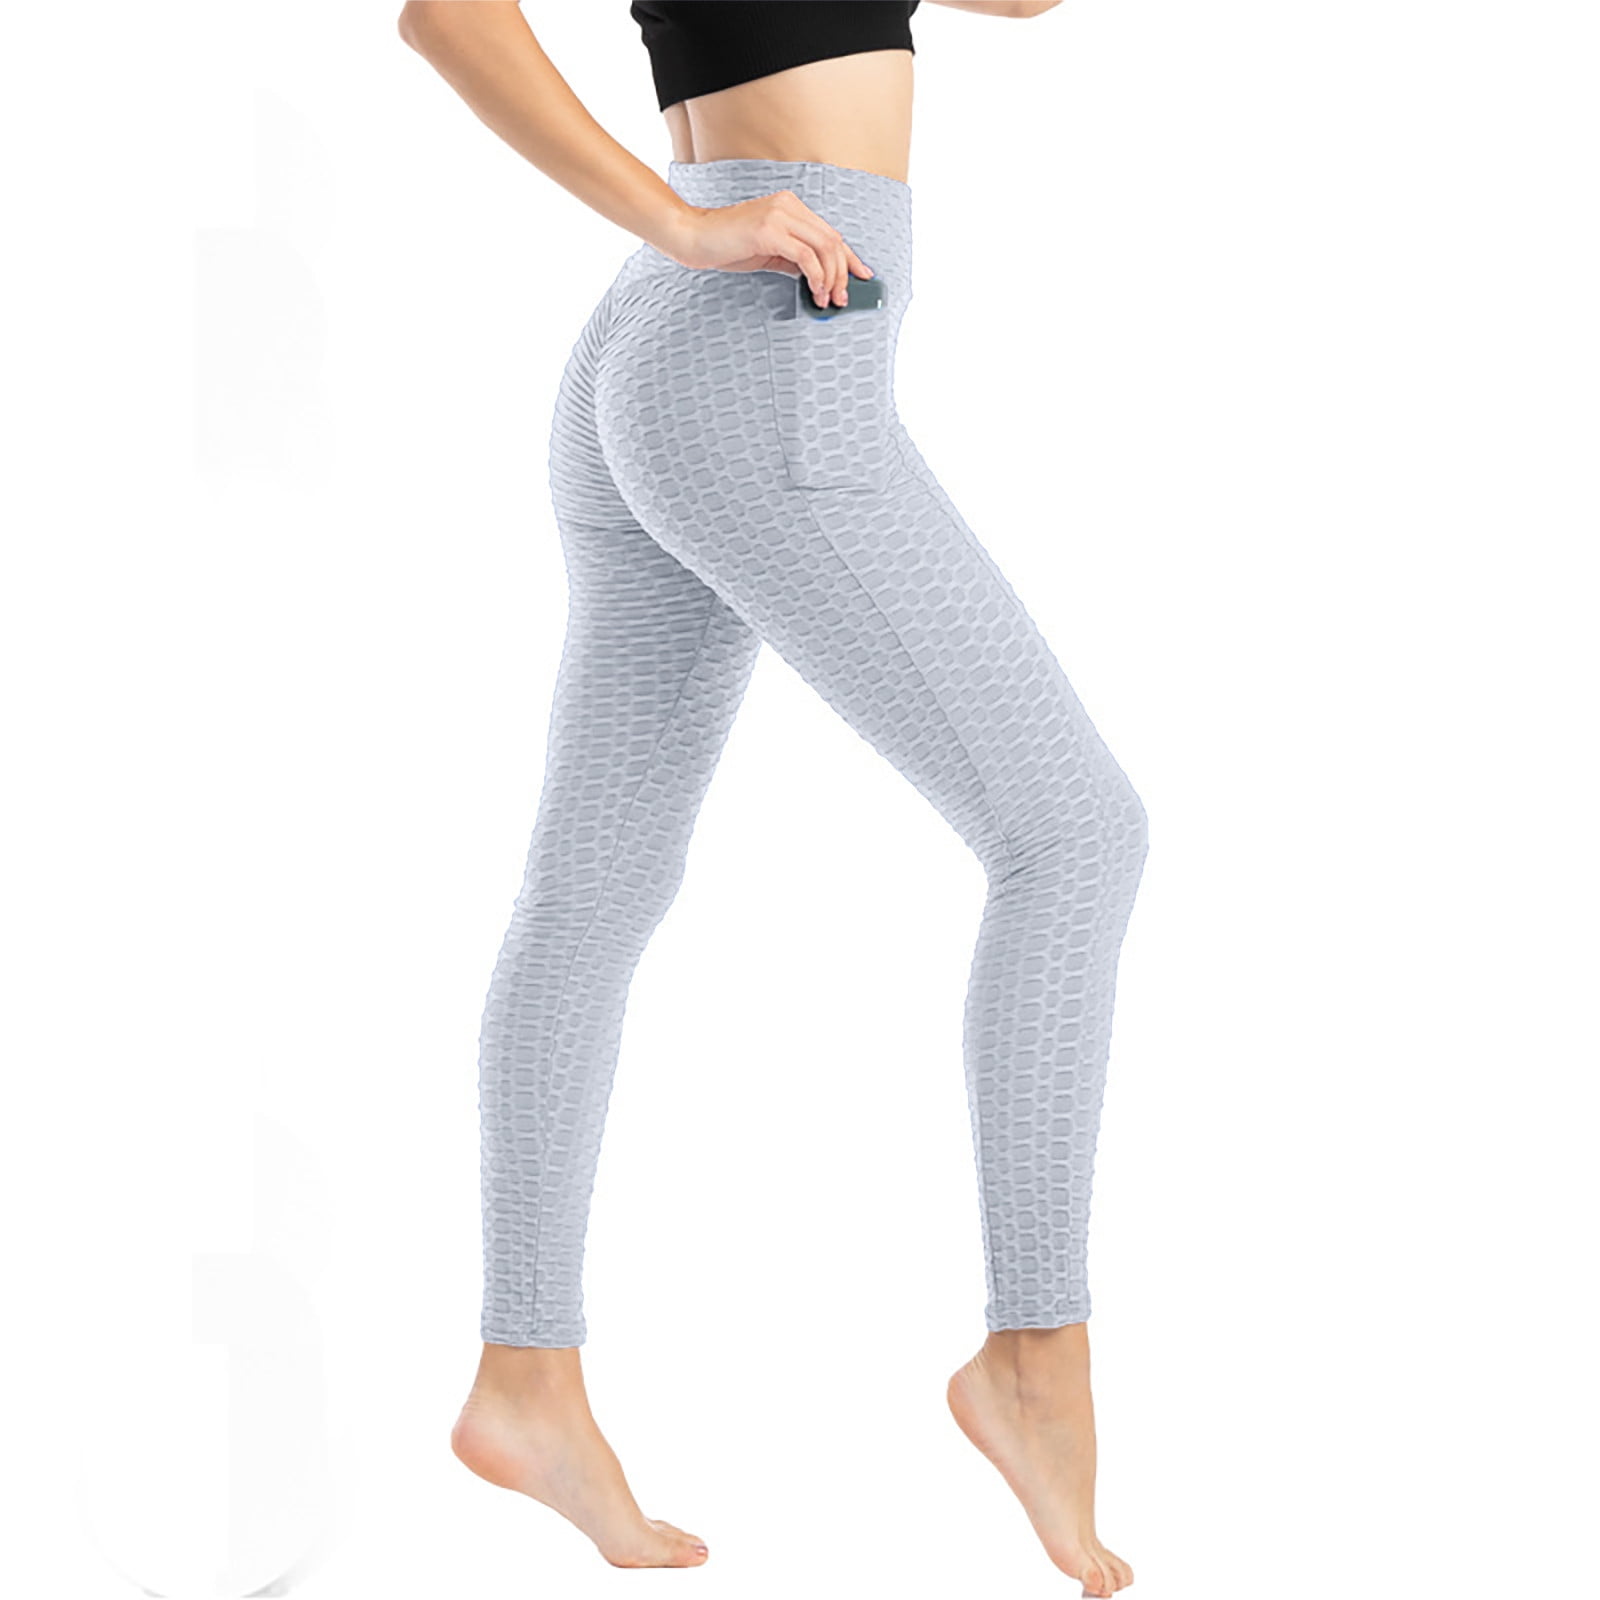 Gubotare Yoga Pants For Women With Pockets Leggings for Women-No  See-Through High Waisted Tummy Control Yoga Pants Workout Running  Legging,White M 